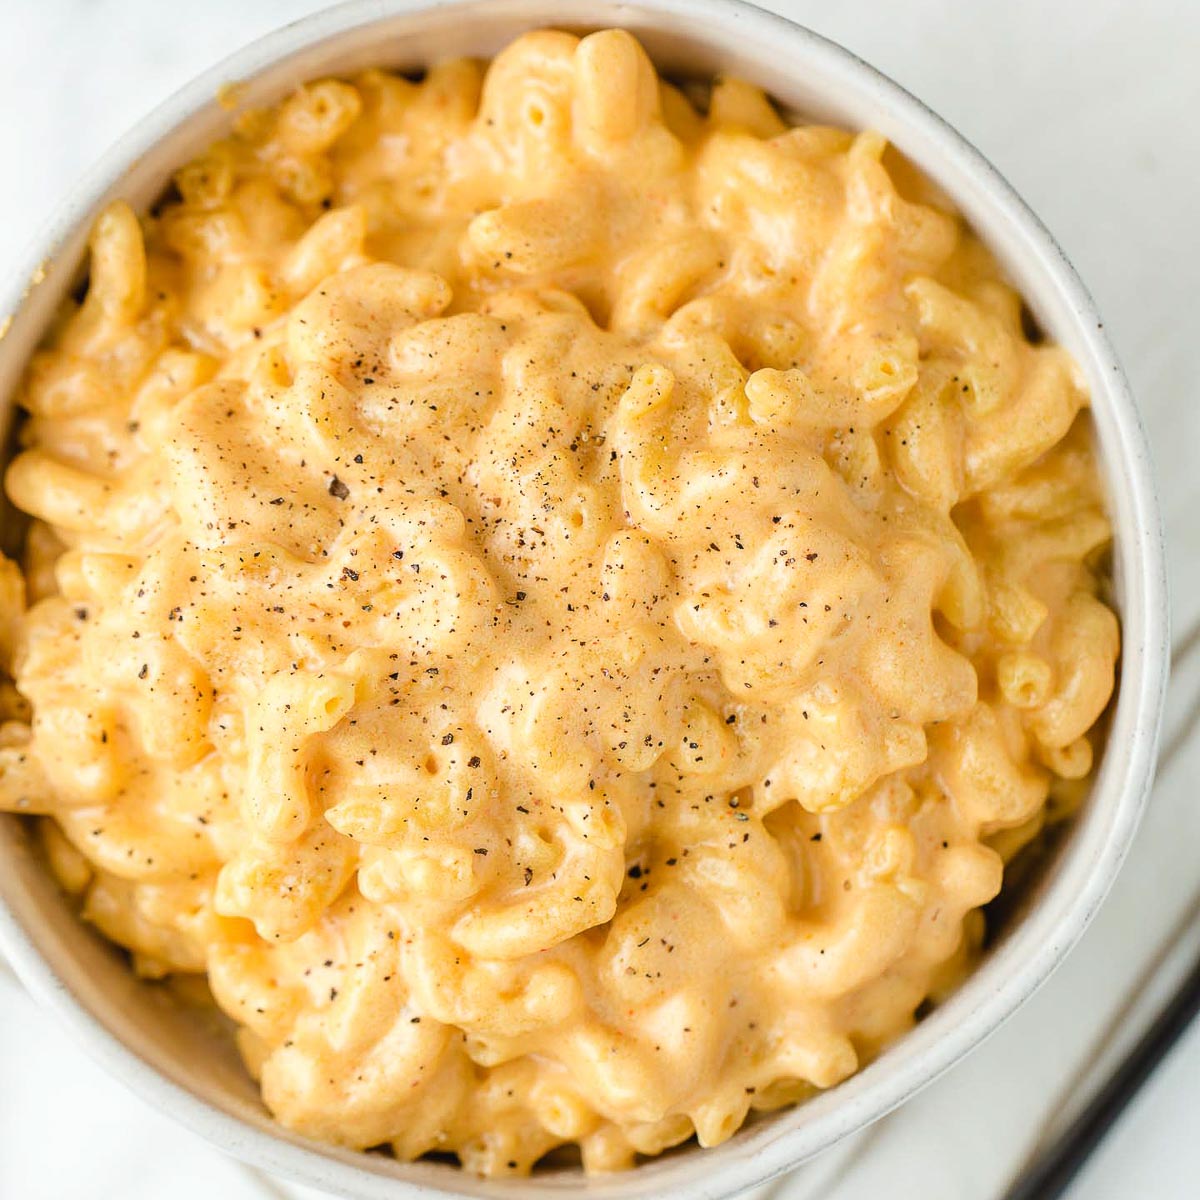 A top view photo of a bowl of mac and cheese.